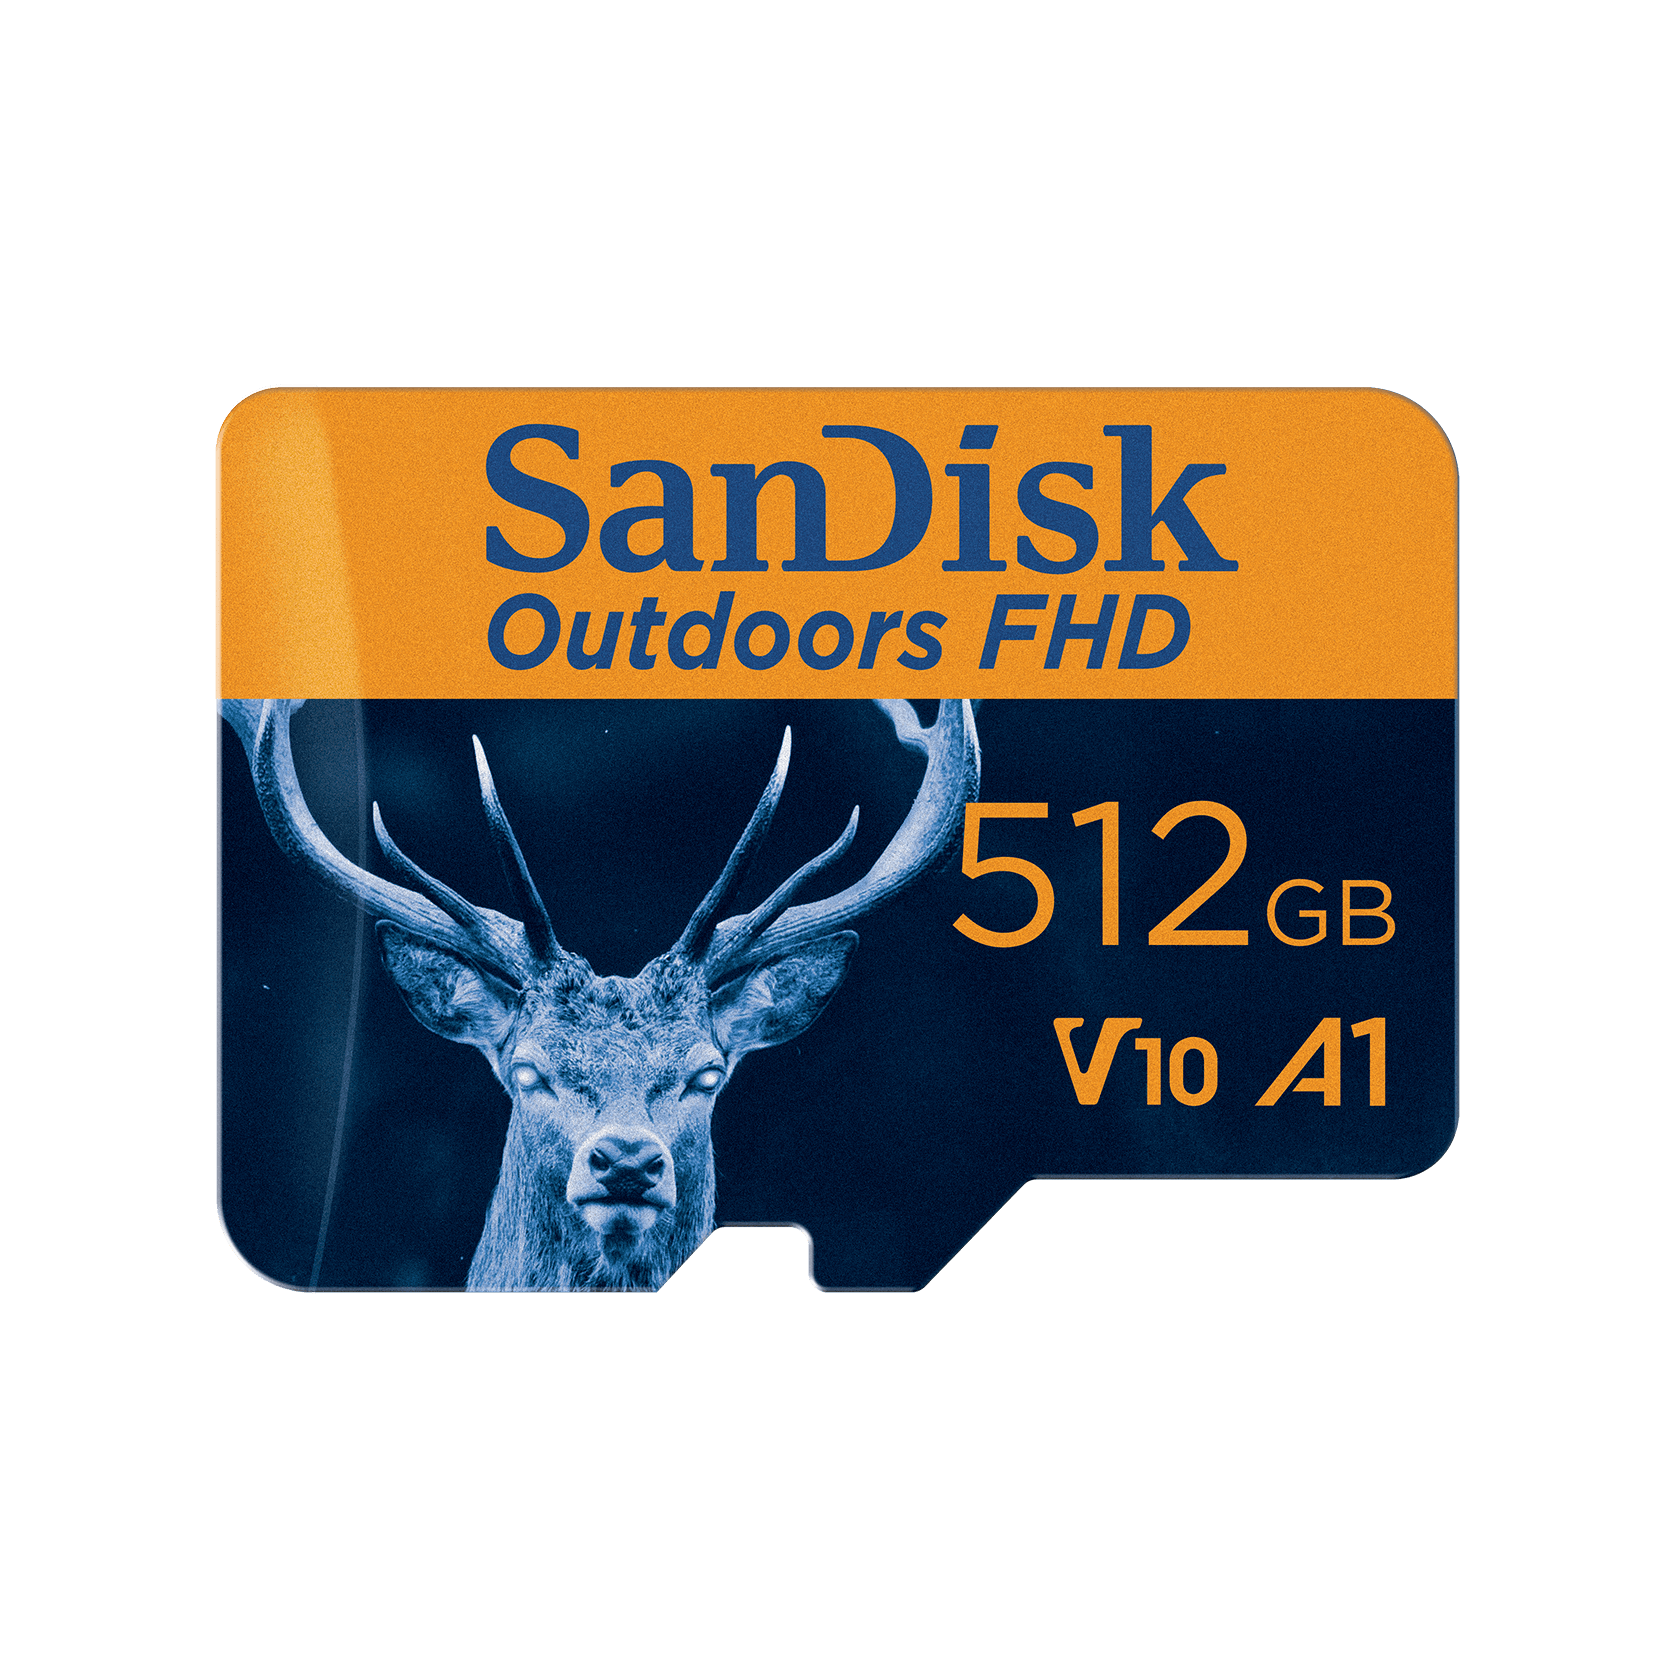 SanDisk Outdoors FHD MicroSDXC UHS-I Card with SD Adapter - 512GB Single Pack MicroSD Card - SDSQUBL-512G-GN6VA